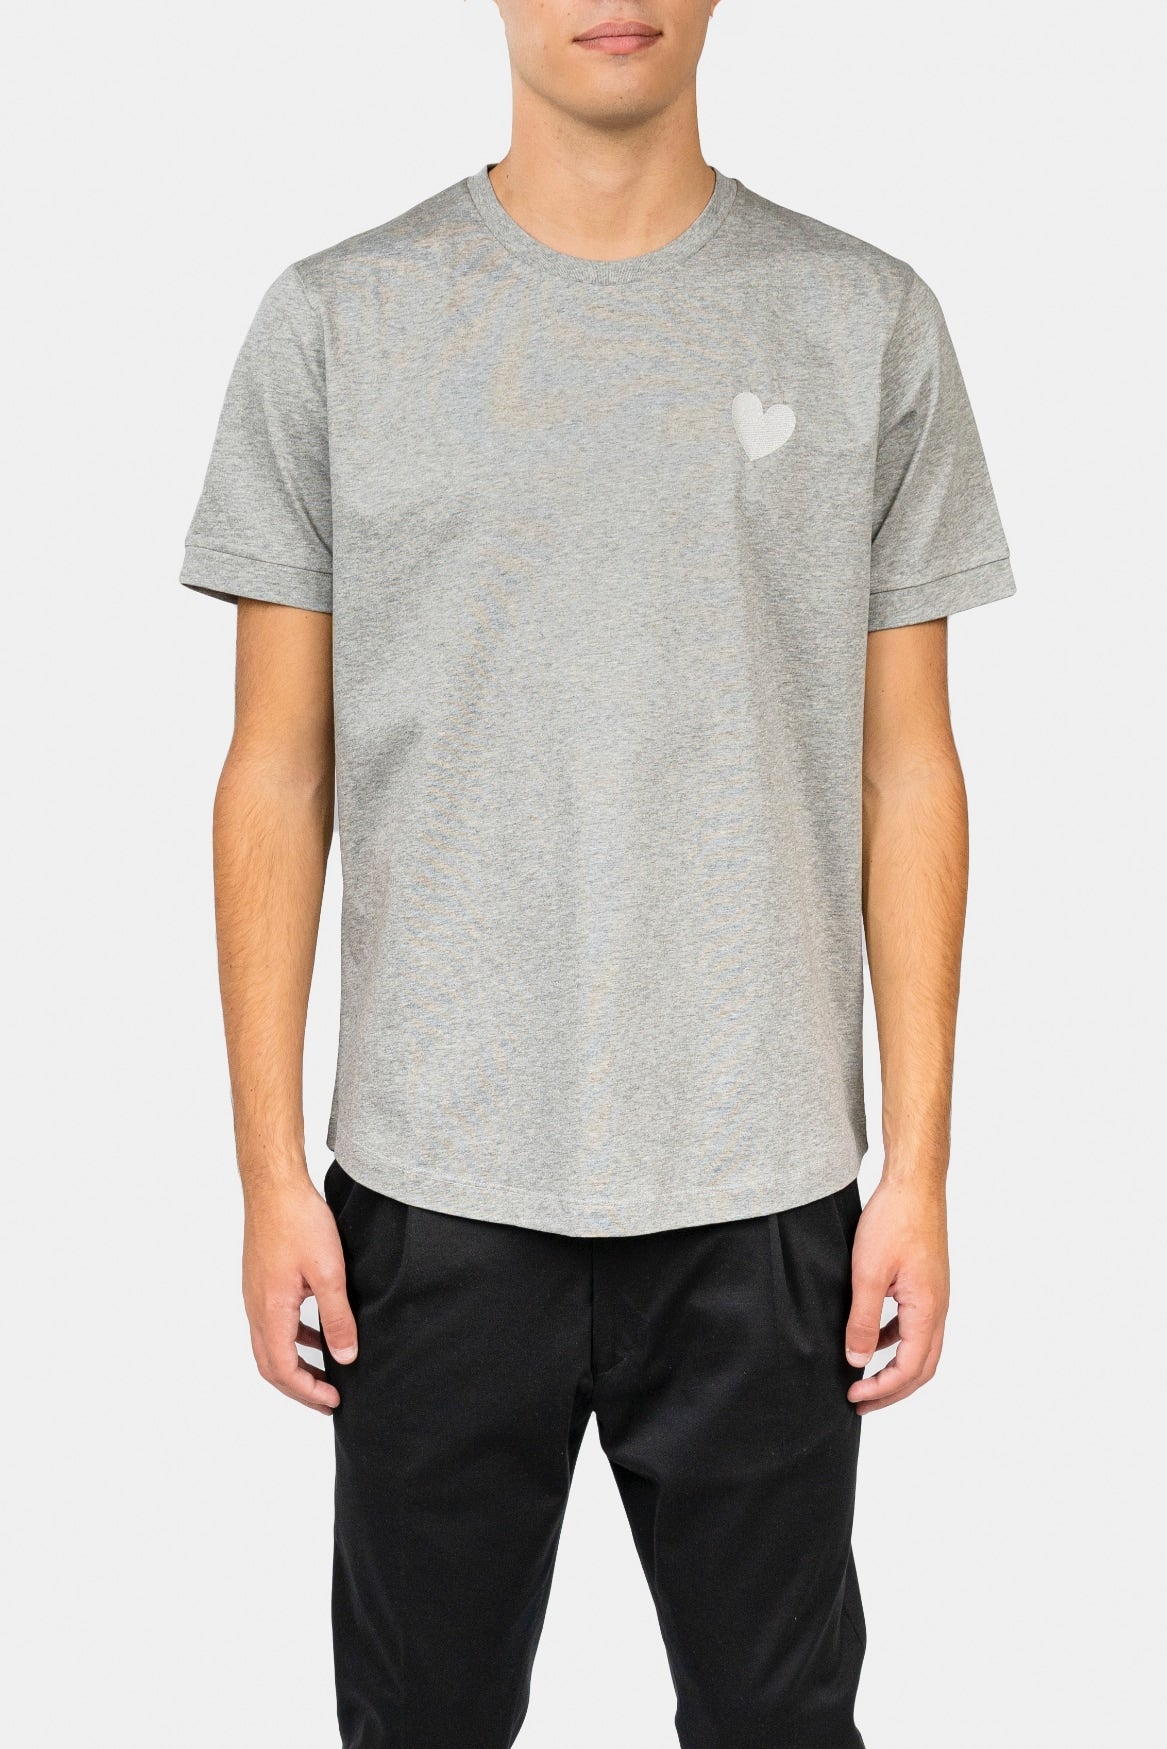 Classic Embroidery Heart Glacier Gray T-shirt